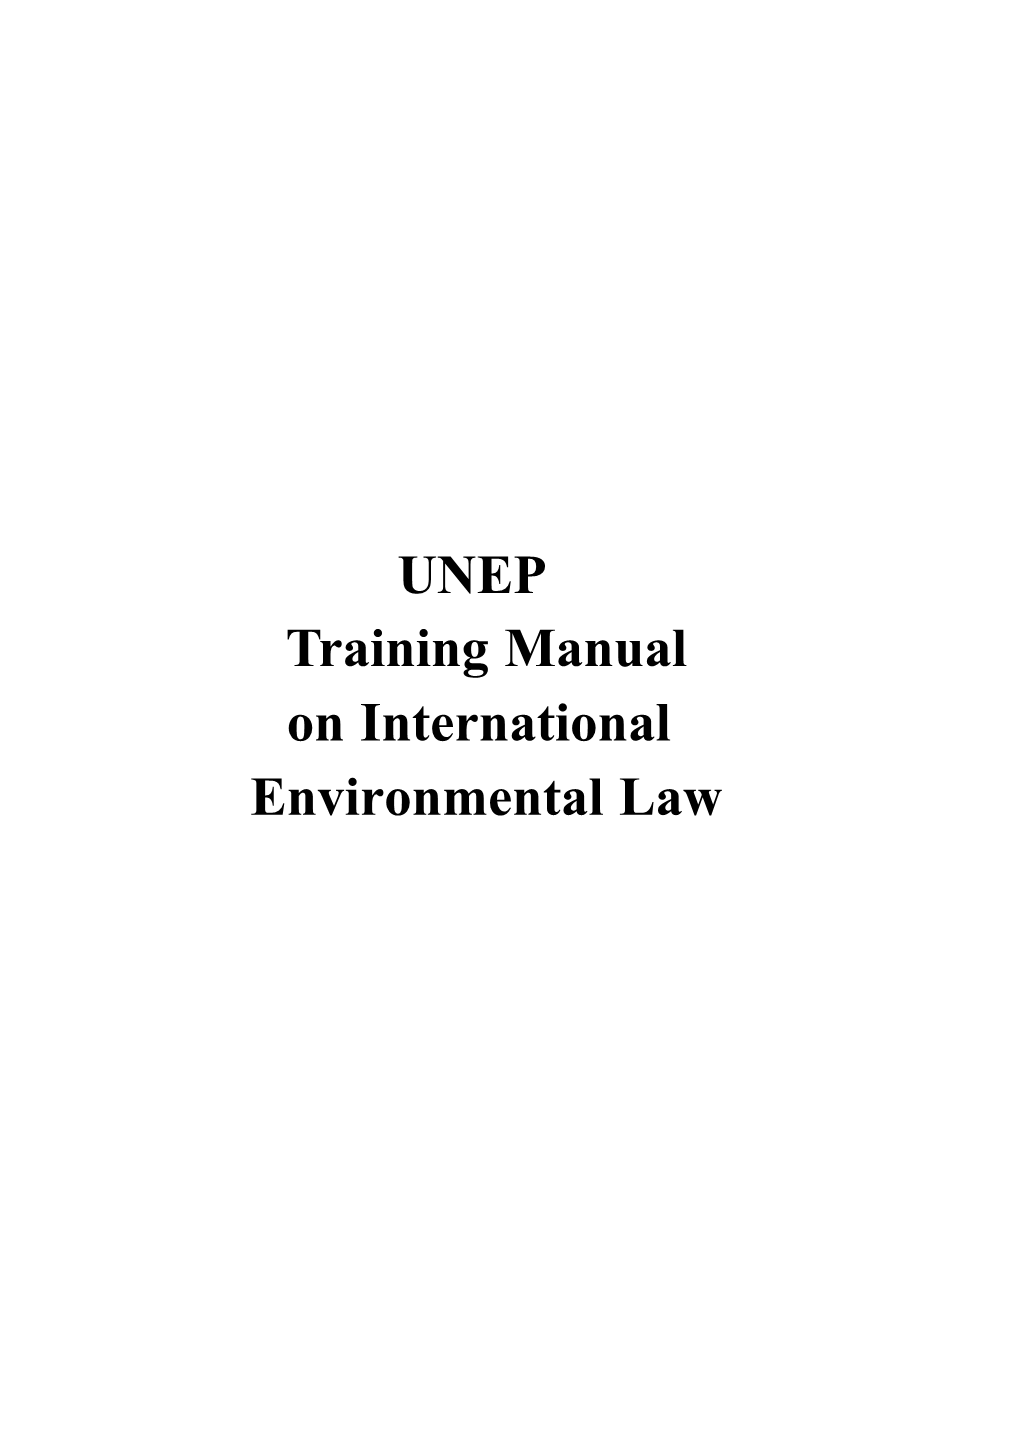 Chapter 1: Multilateral Environmental Agreements 1 I